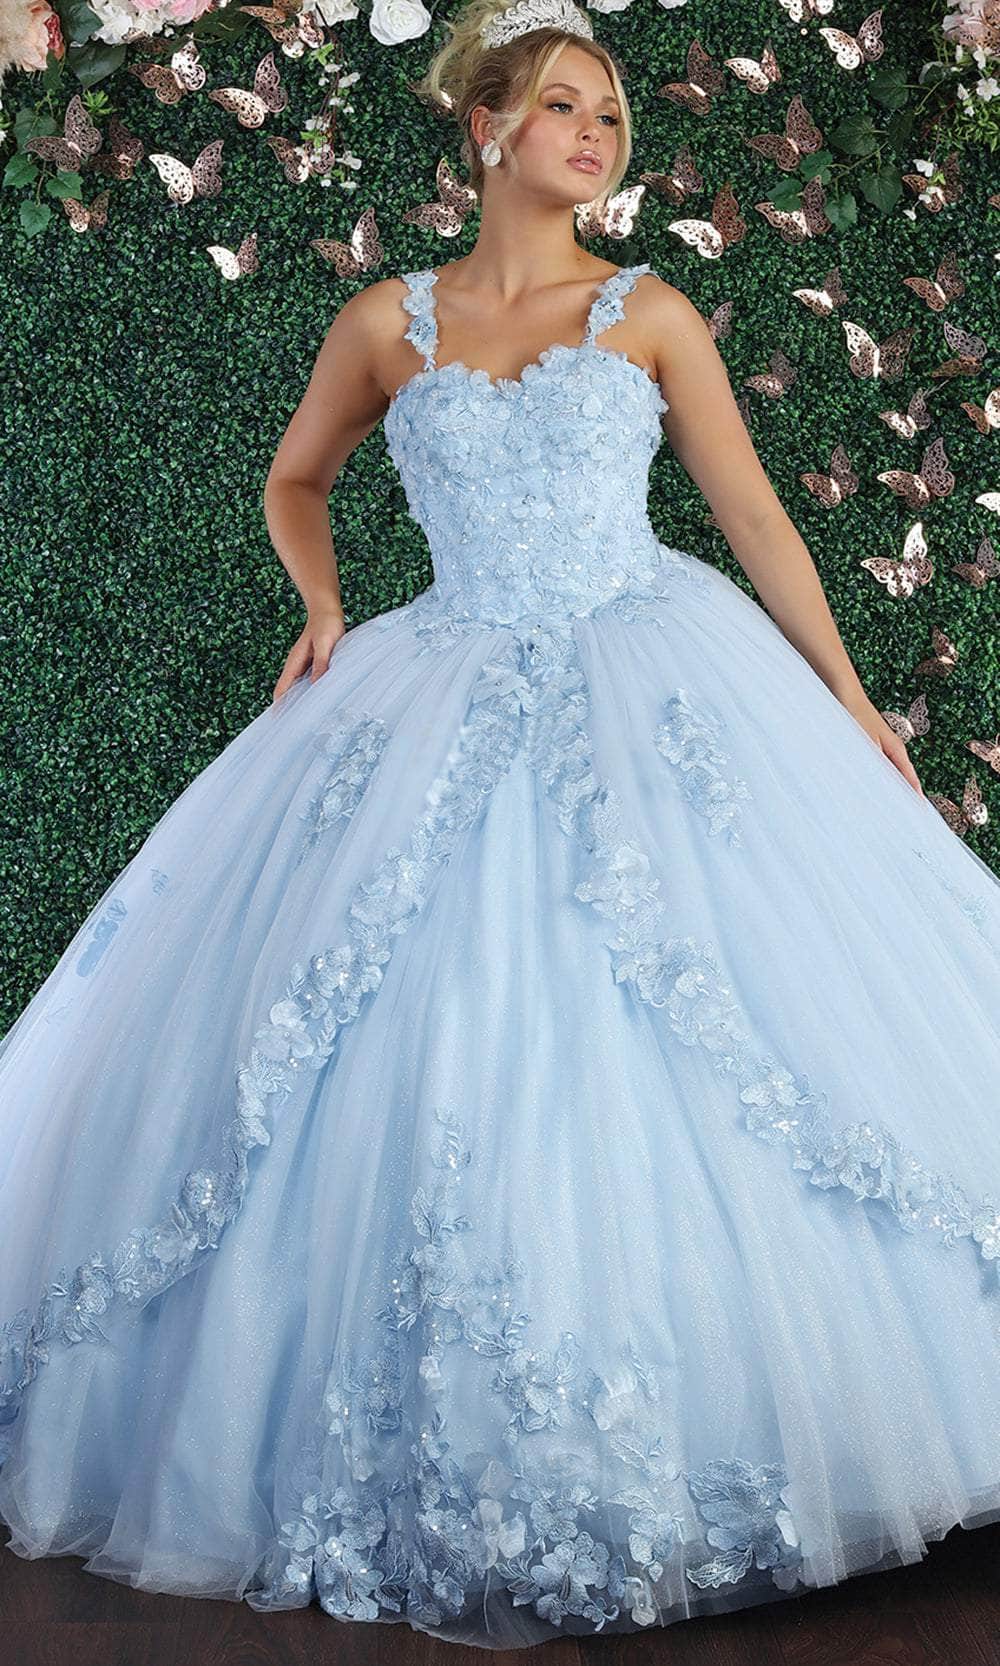 Image of May Queen LK159 - Floral Appliqued Sweetheart Ballgown